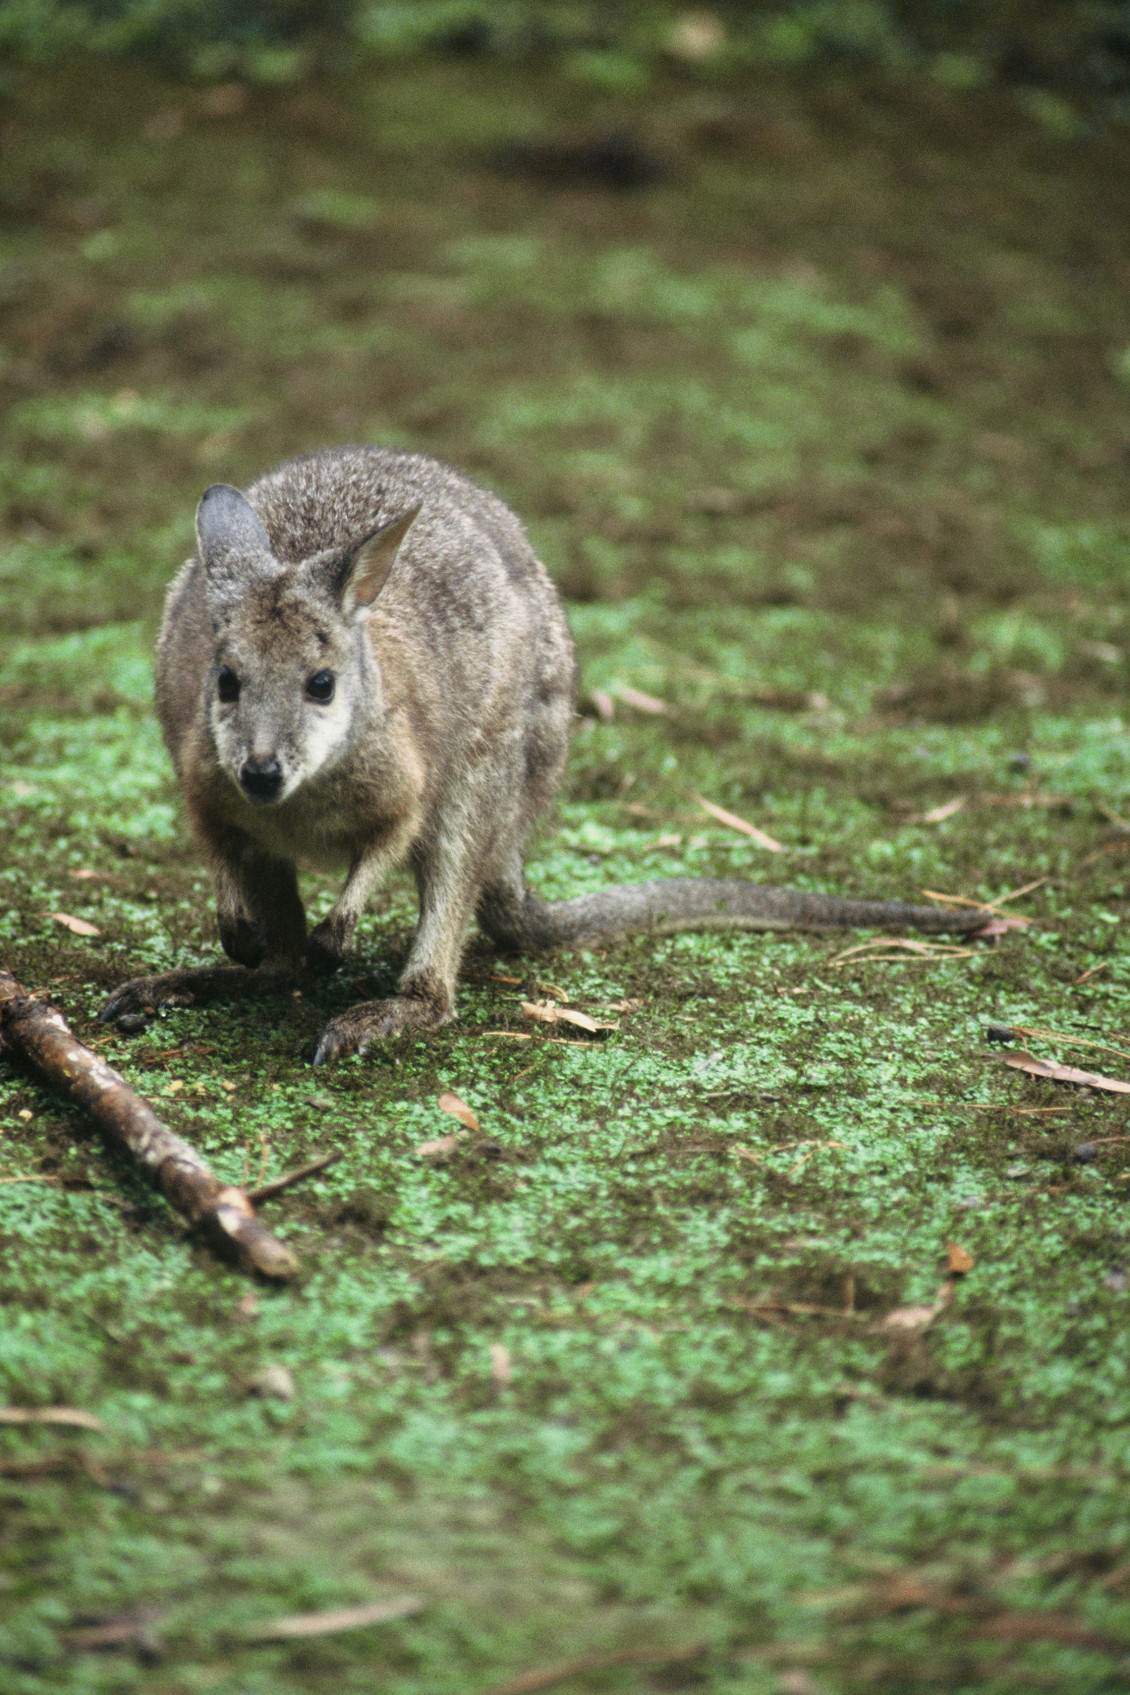 202105 Dama Wallaby Doc Crown copyright photo credit required